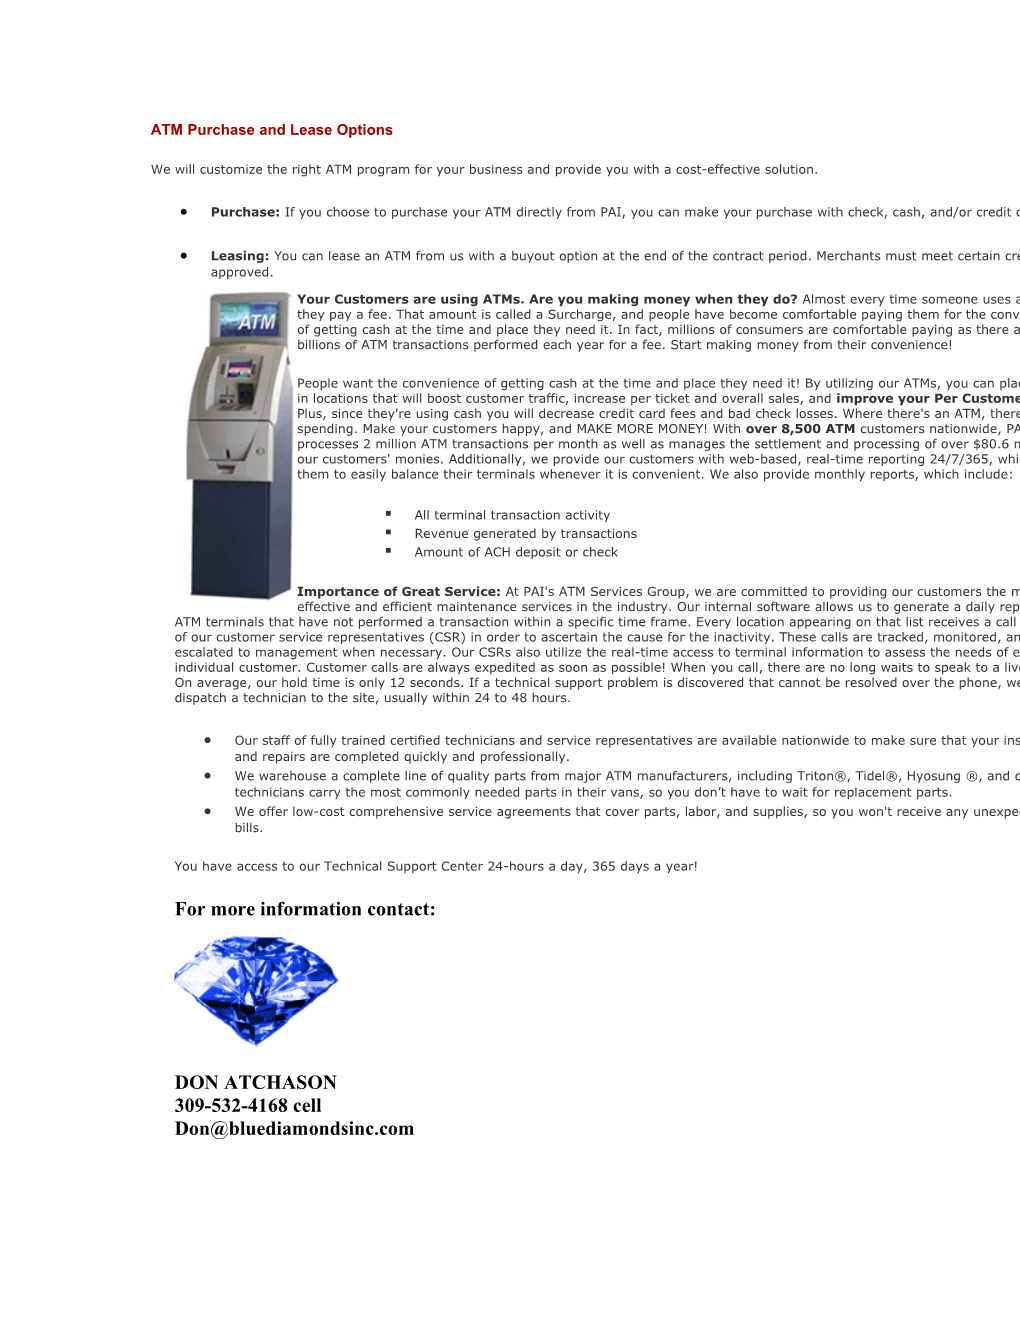 ATM Purchase and Lease Options